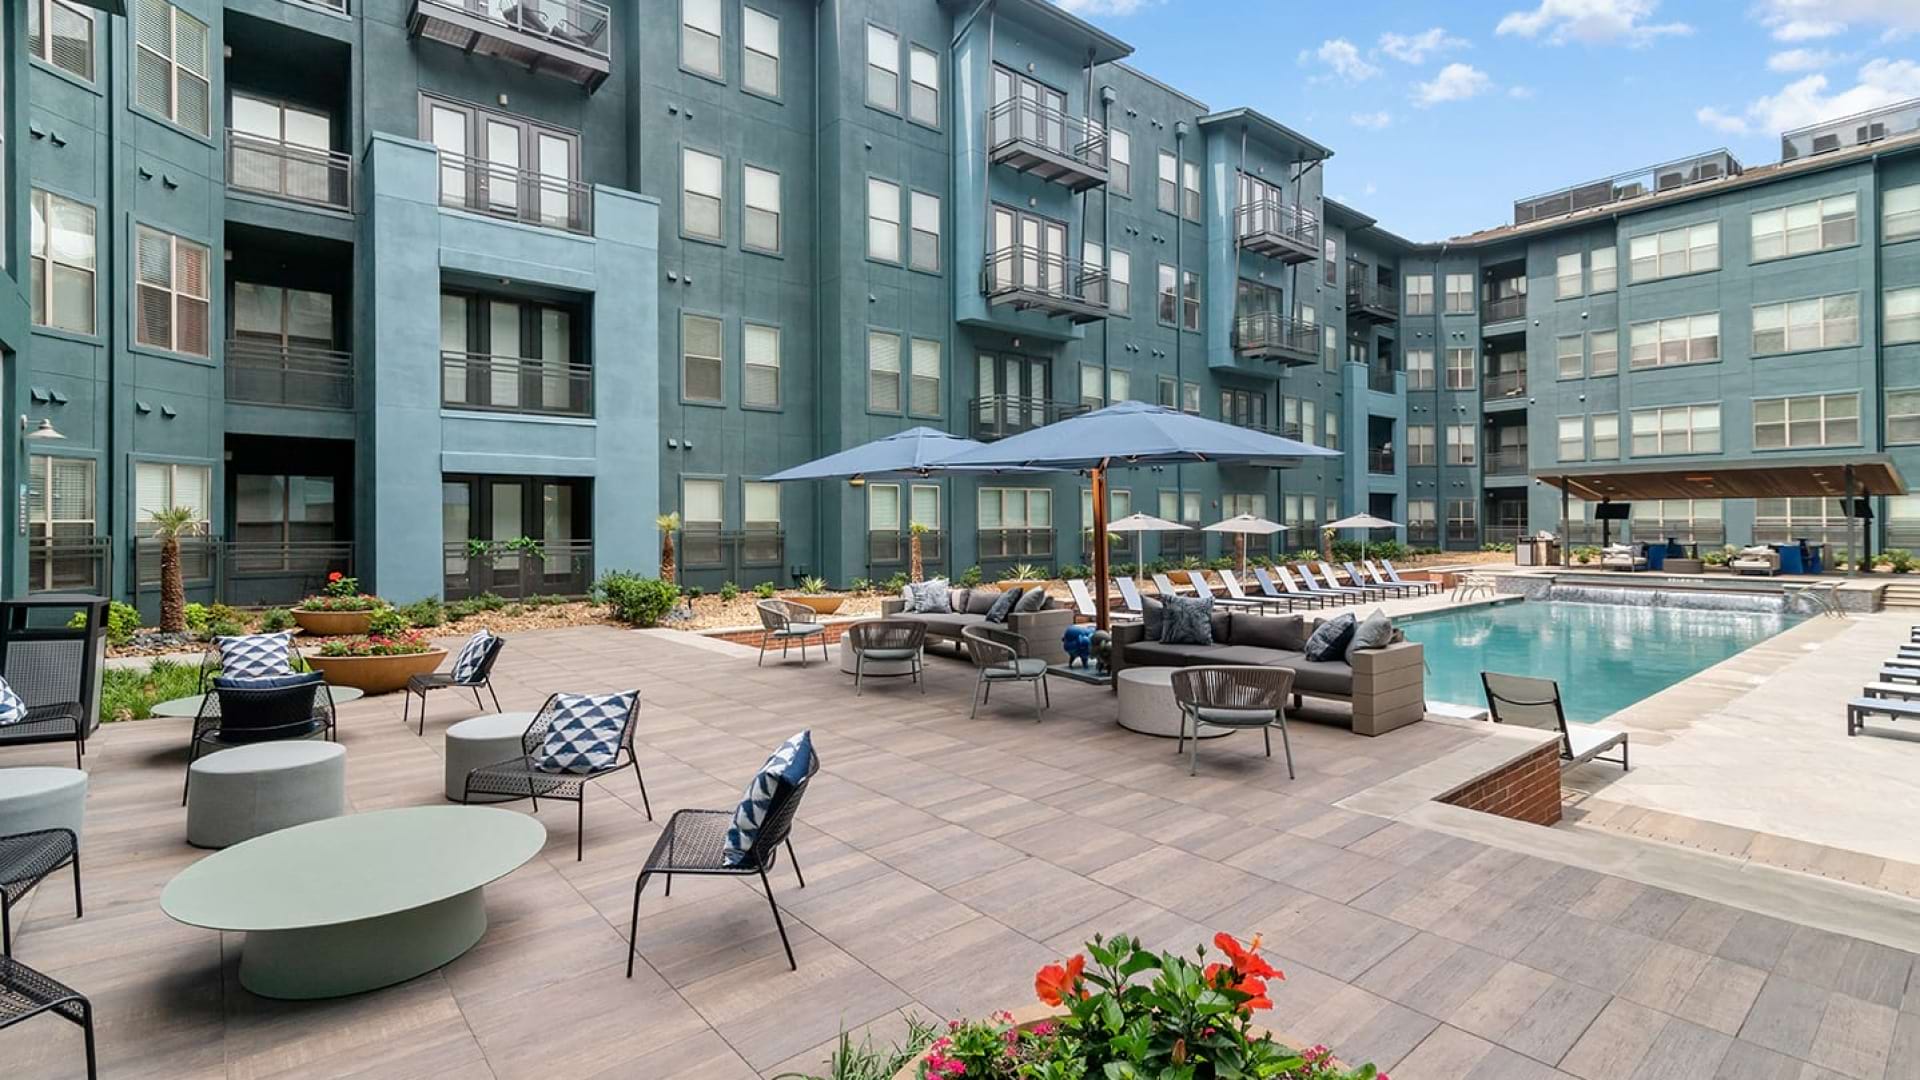 Farmers Branch apartments with swimming pool